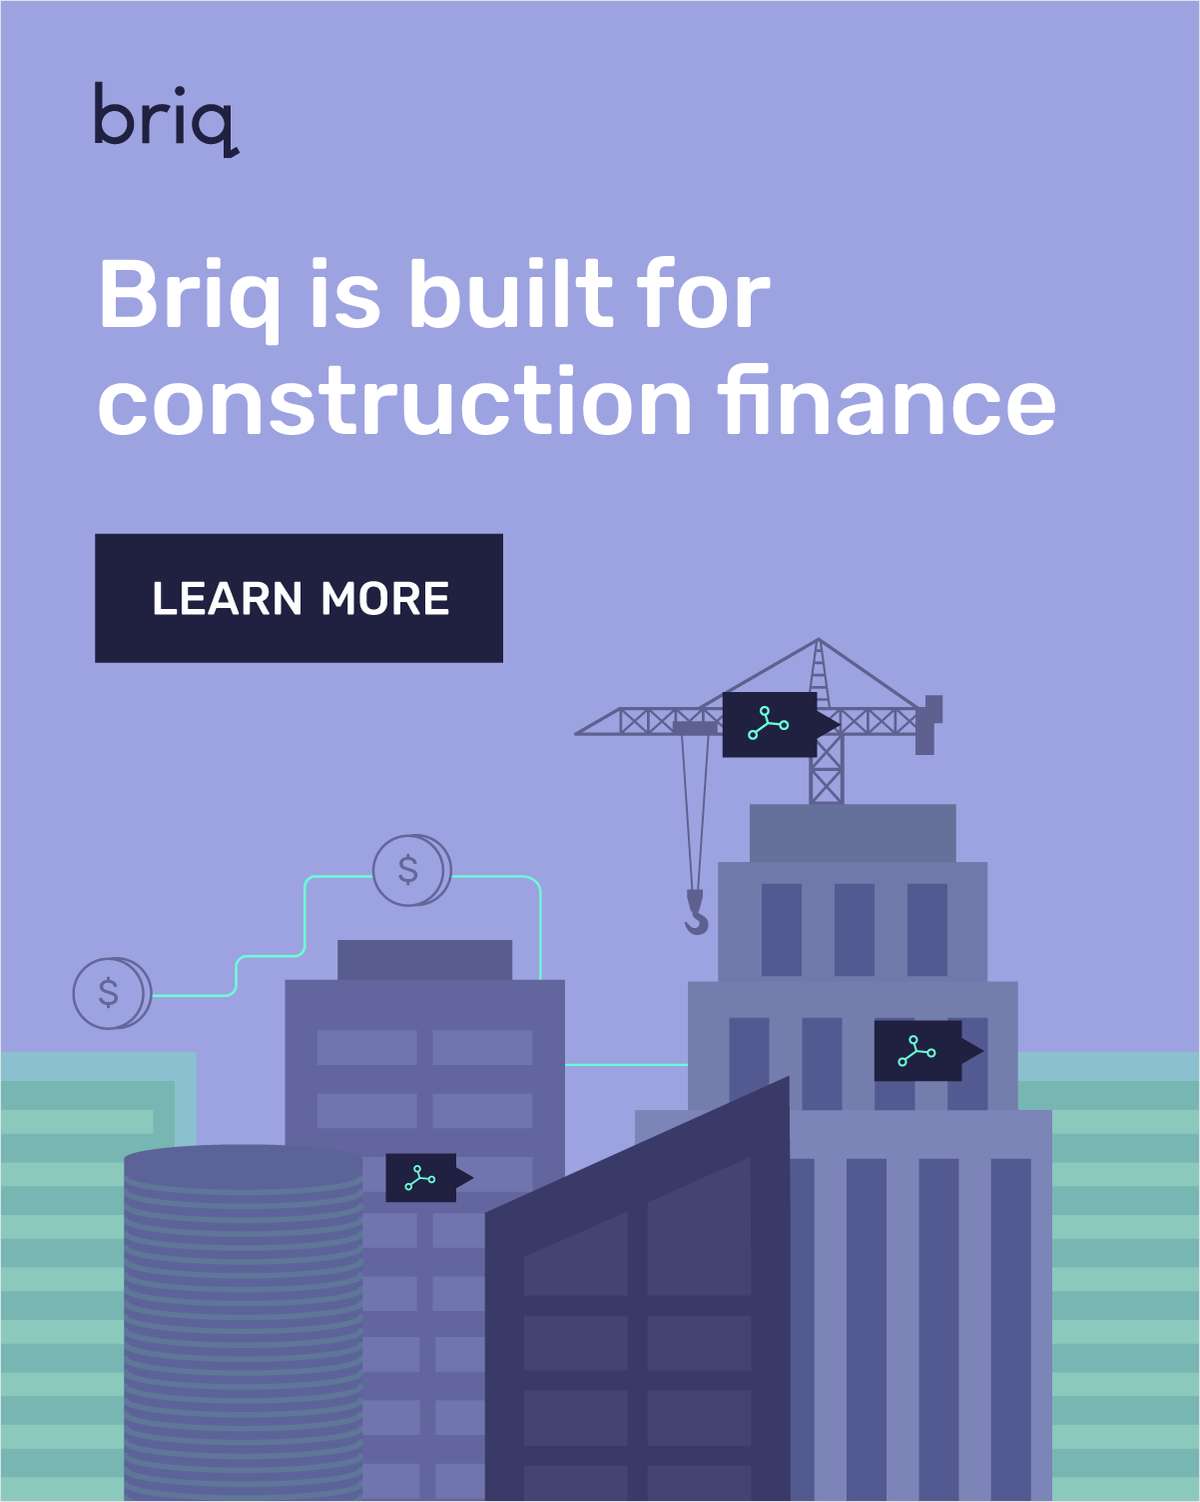 [Infographic] Built for Construction Finance!